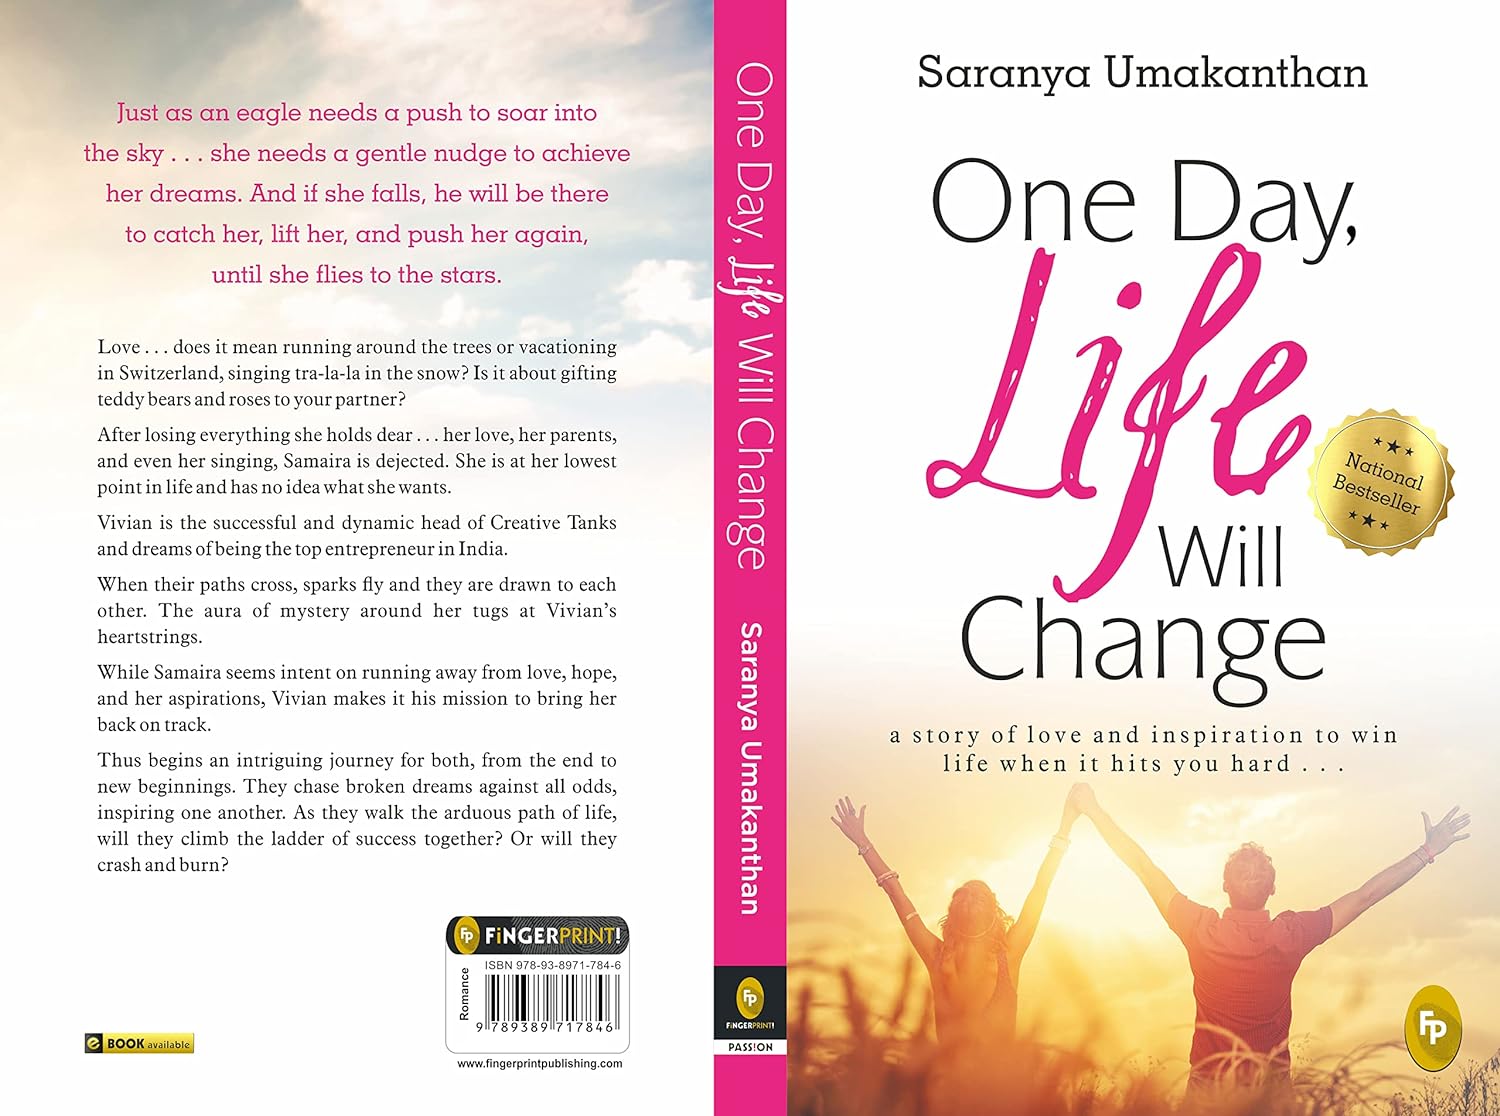 One Day, Life Will Change-A story of love and inspiration to win life when it hits you hard-Stumbit Books